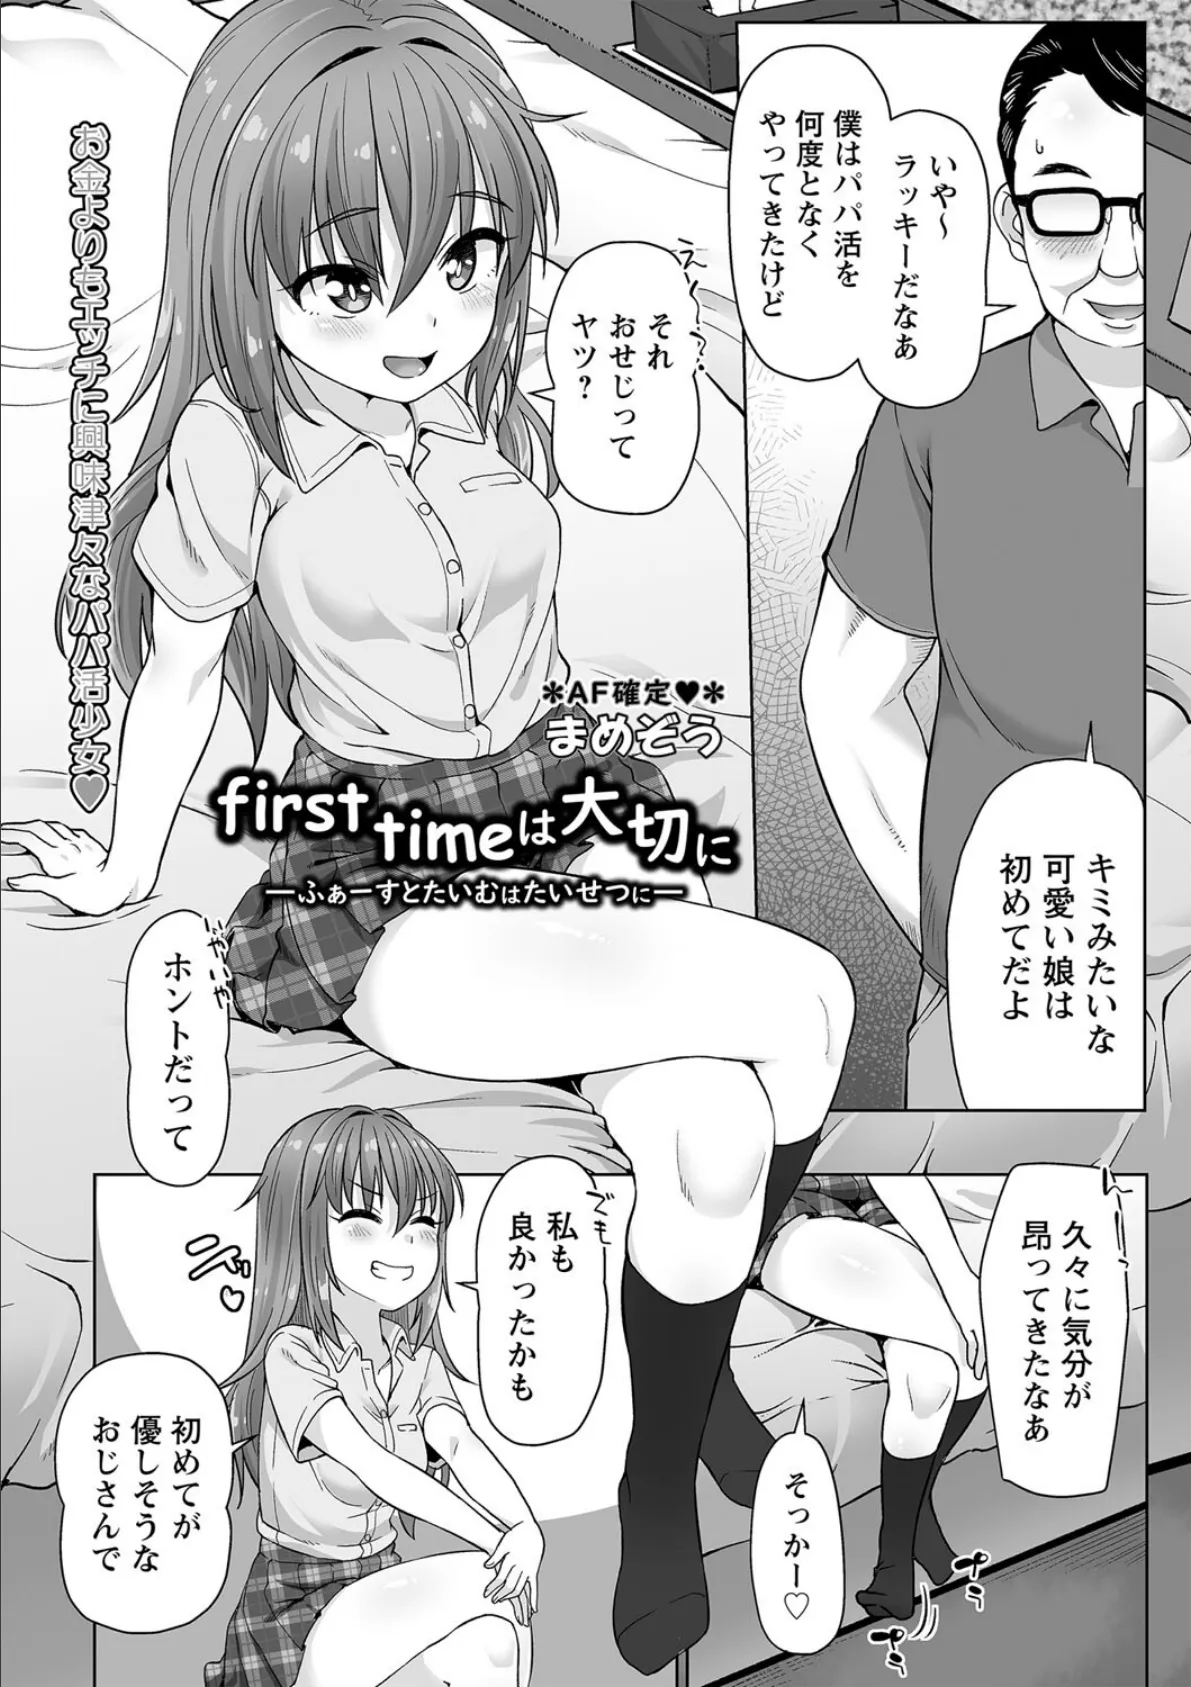 first timeは大切に